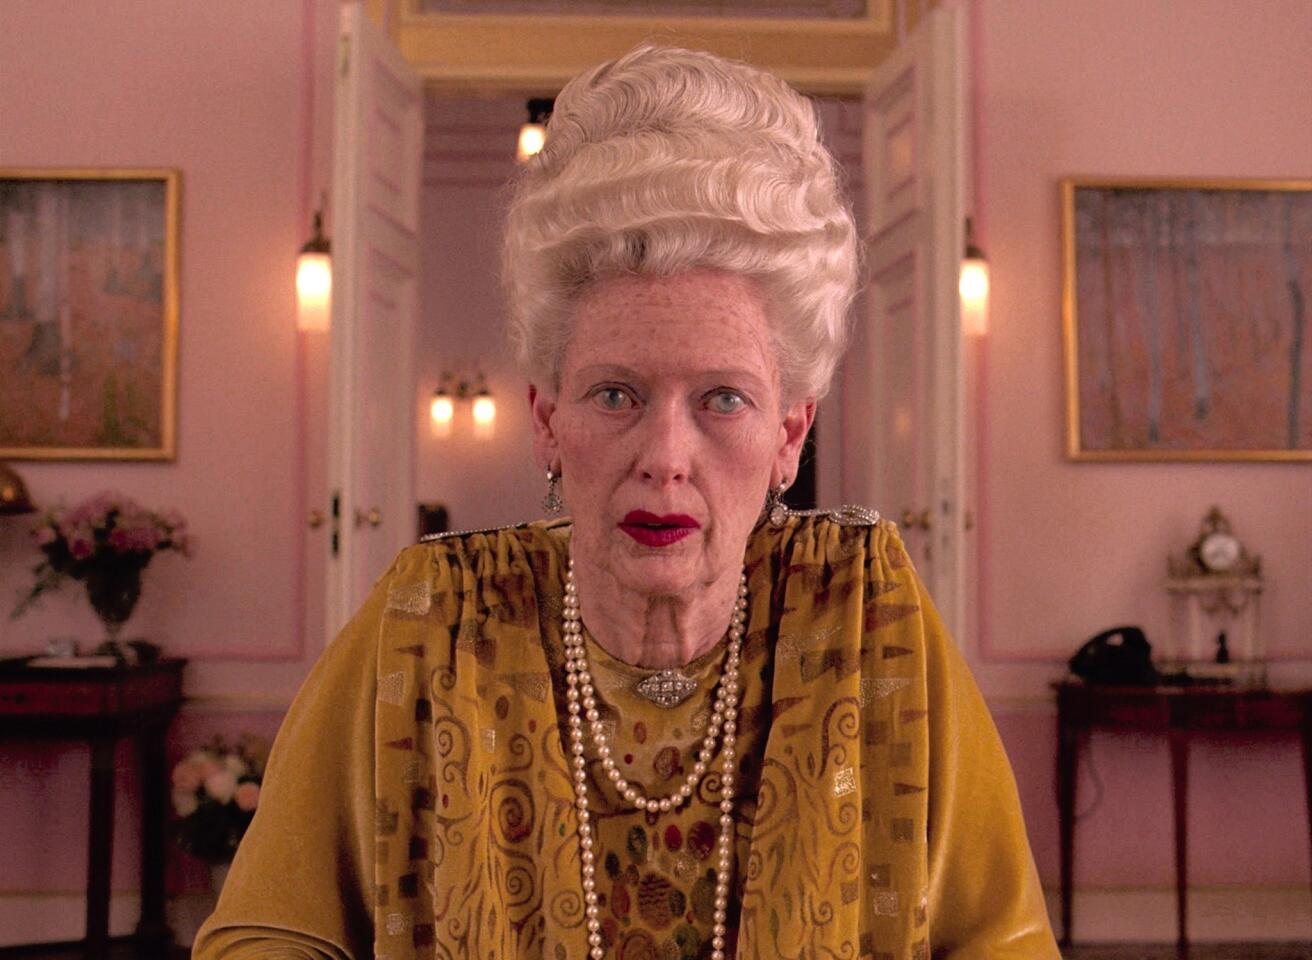 Tilda Swinton's character, especially her lipstick, was inspired by Hannon's mother -- "especially the way older ladies tend to put their lipstick on without using a mirror," Hannon said.